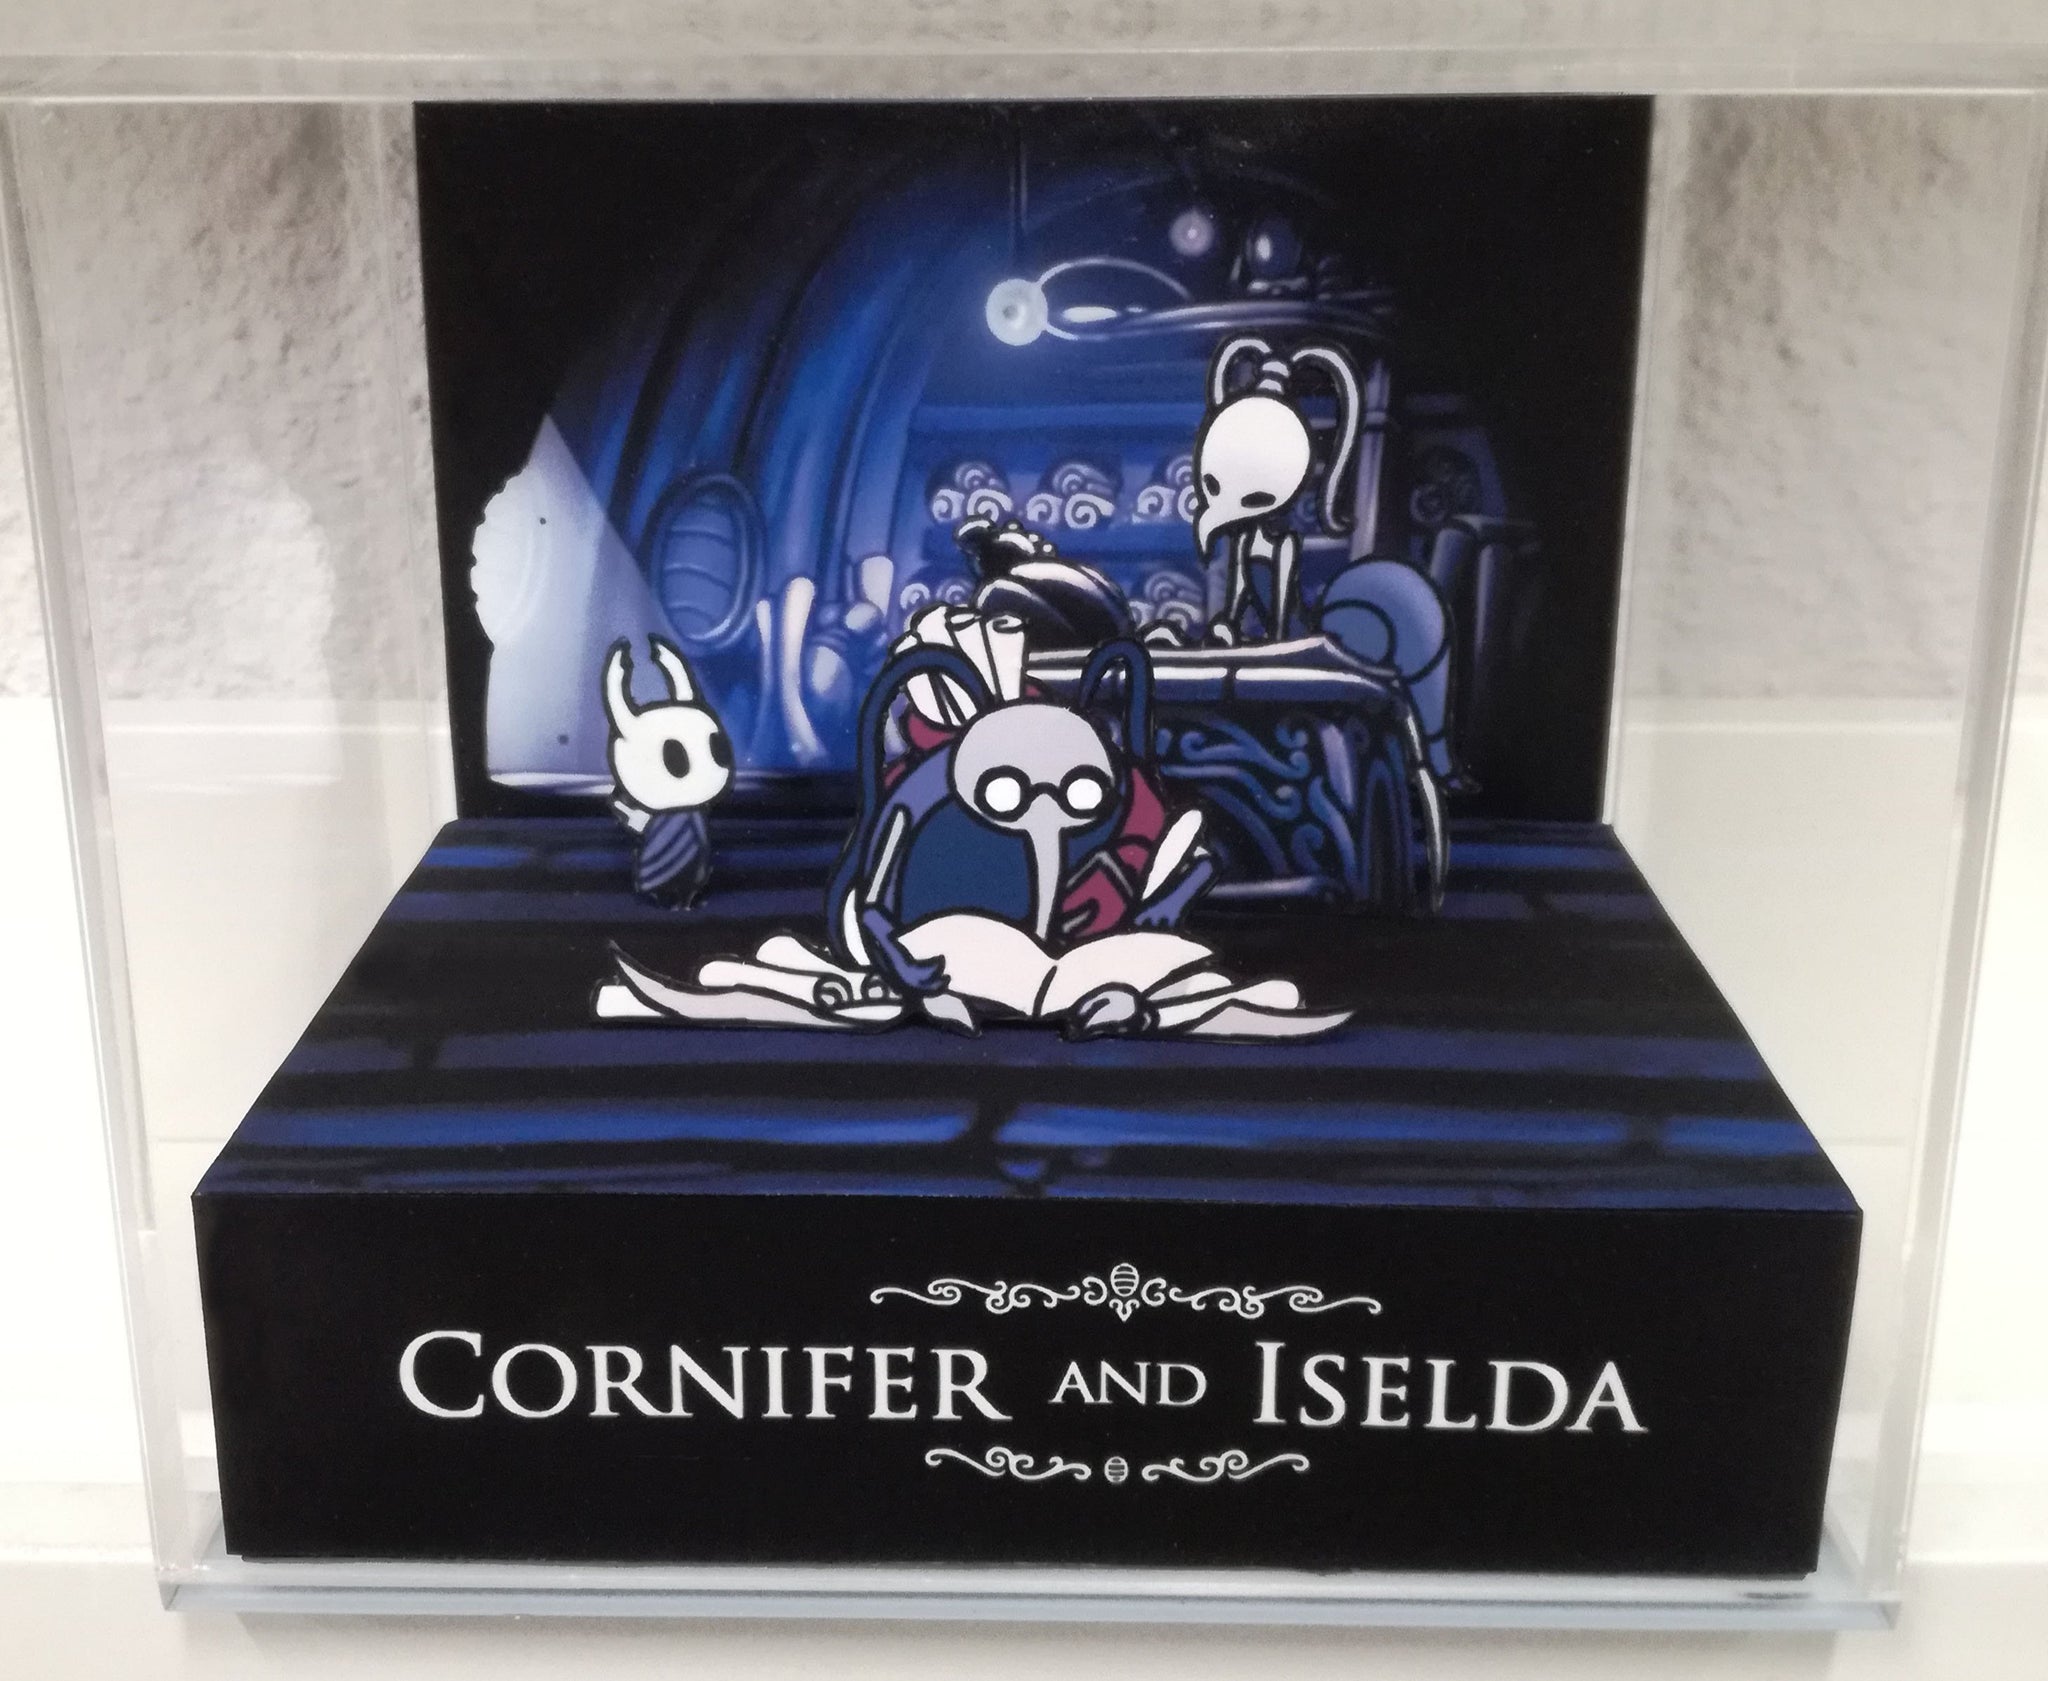 Hollow Knight Nightmare King Grimm Cubic Diorama – ARTS-MD